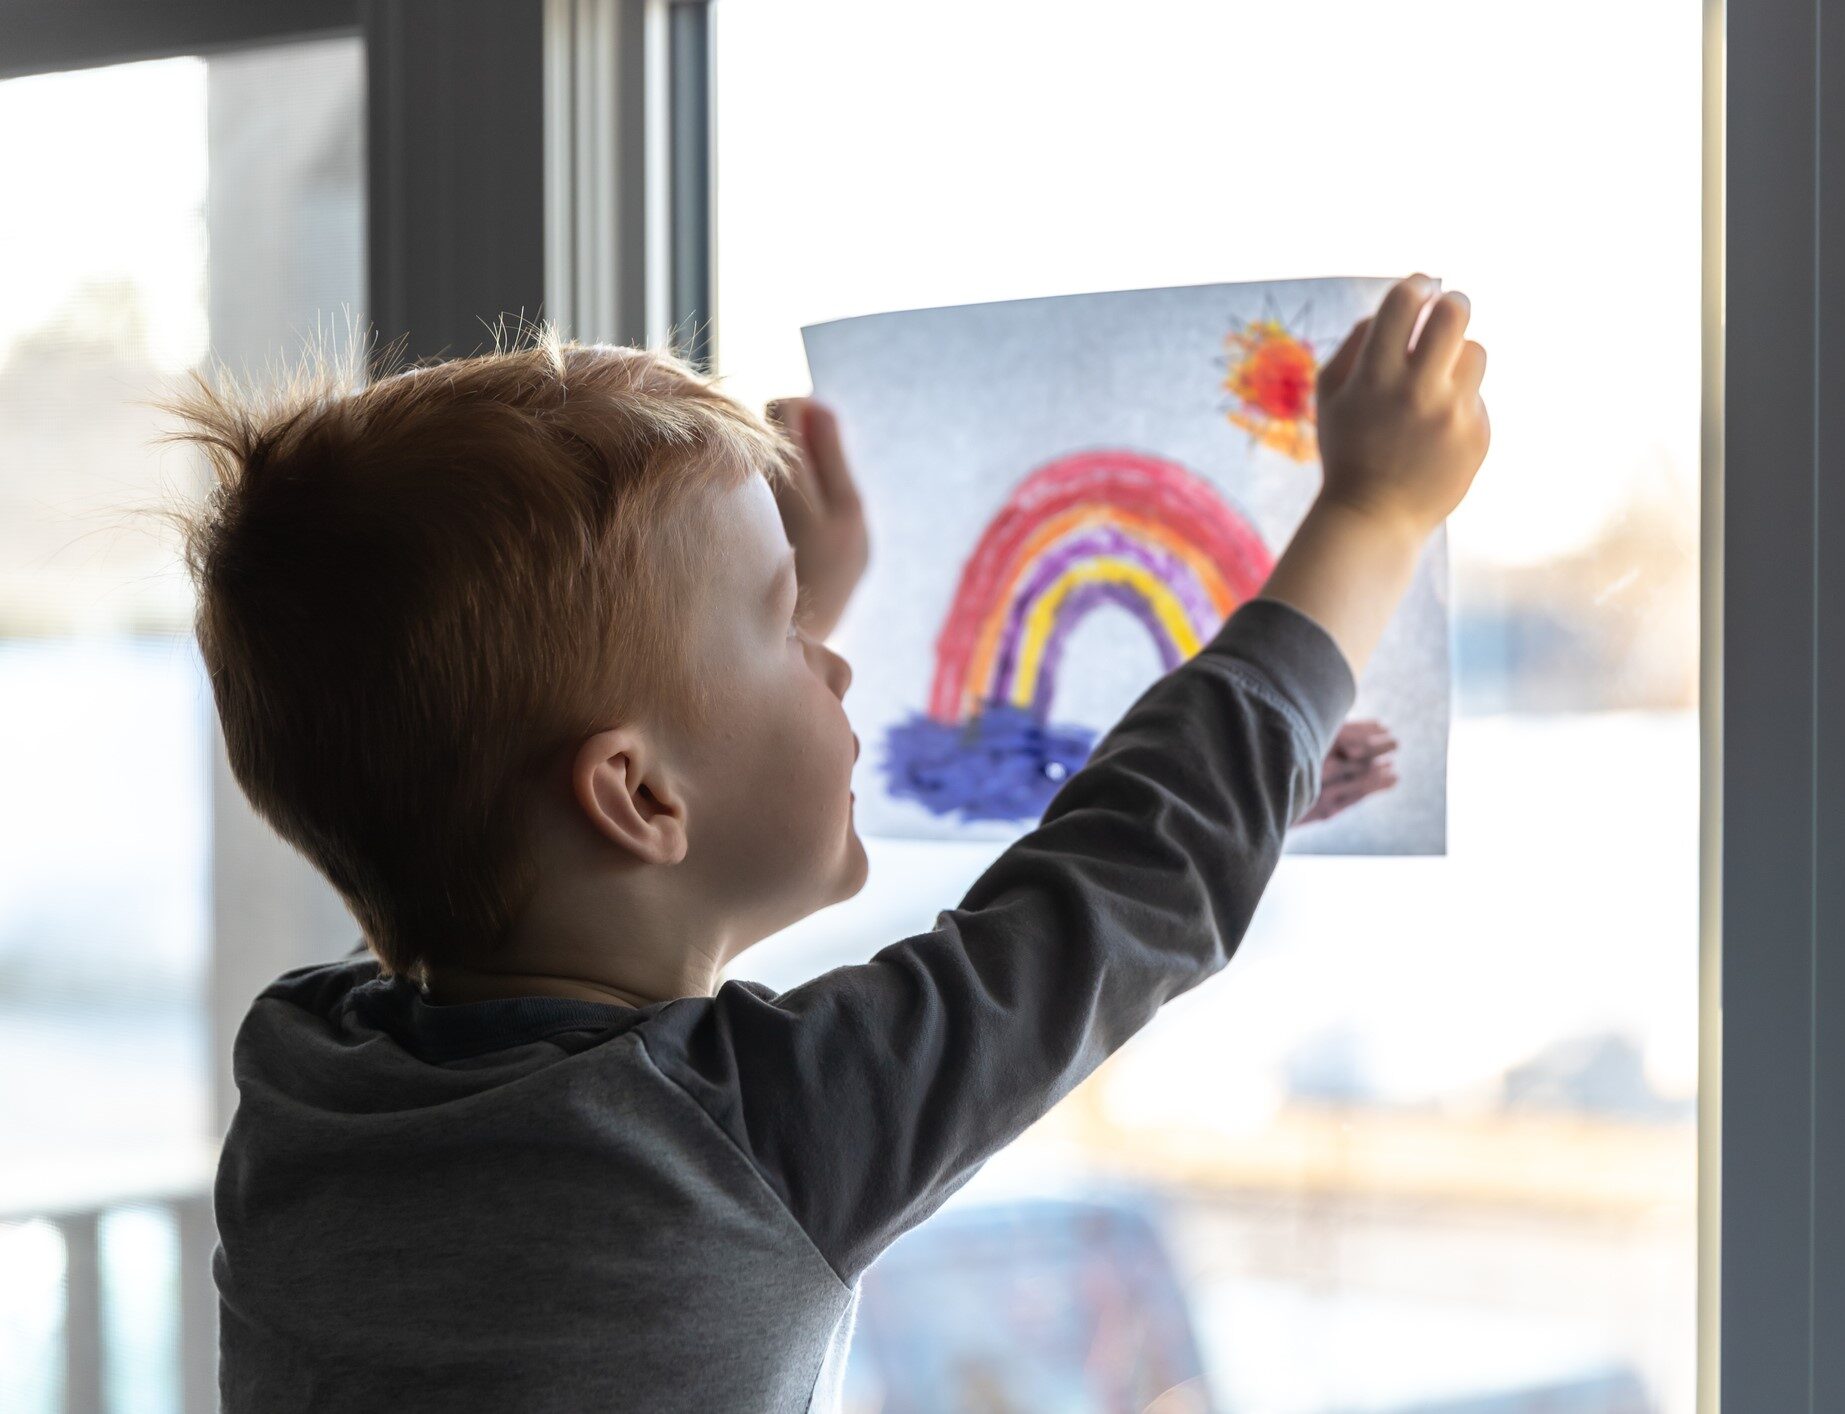 A young boy holds up a drawing of a rainbow against a window.